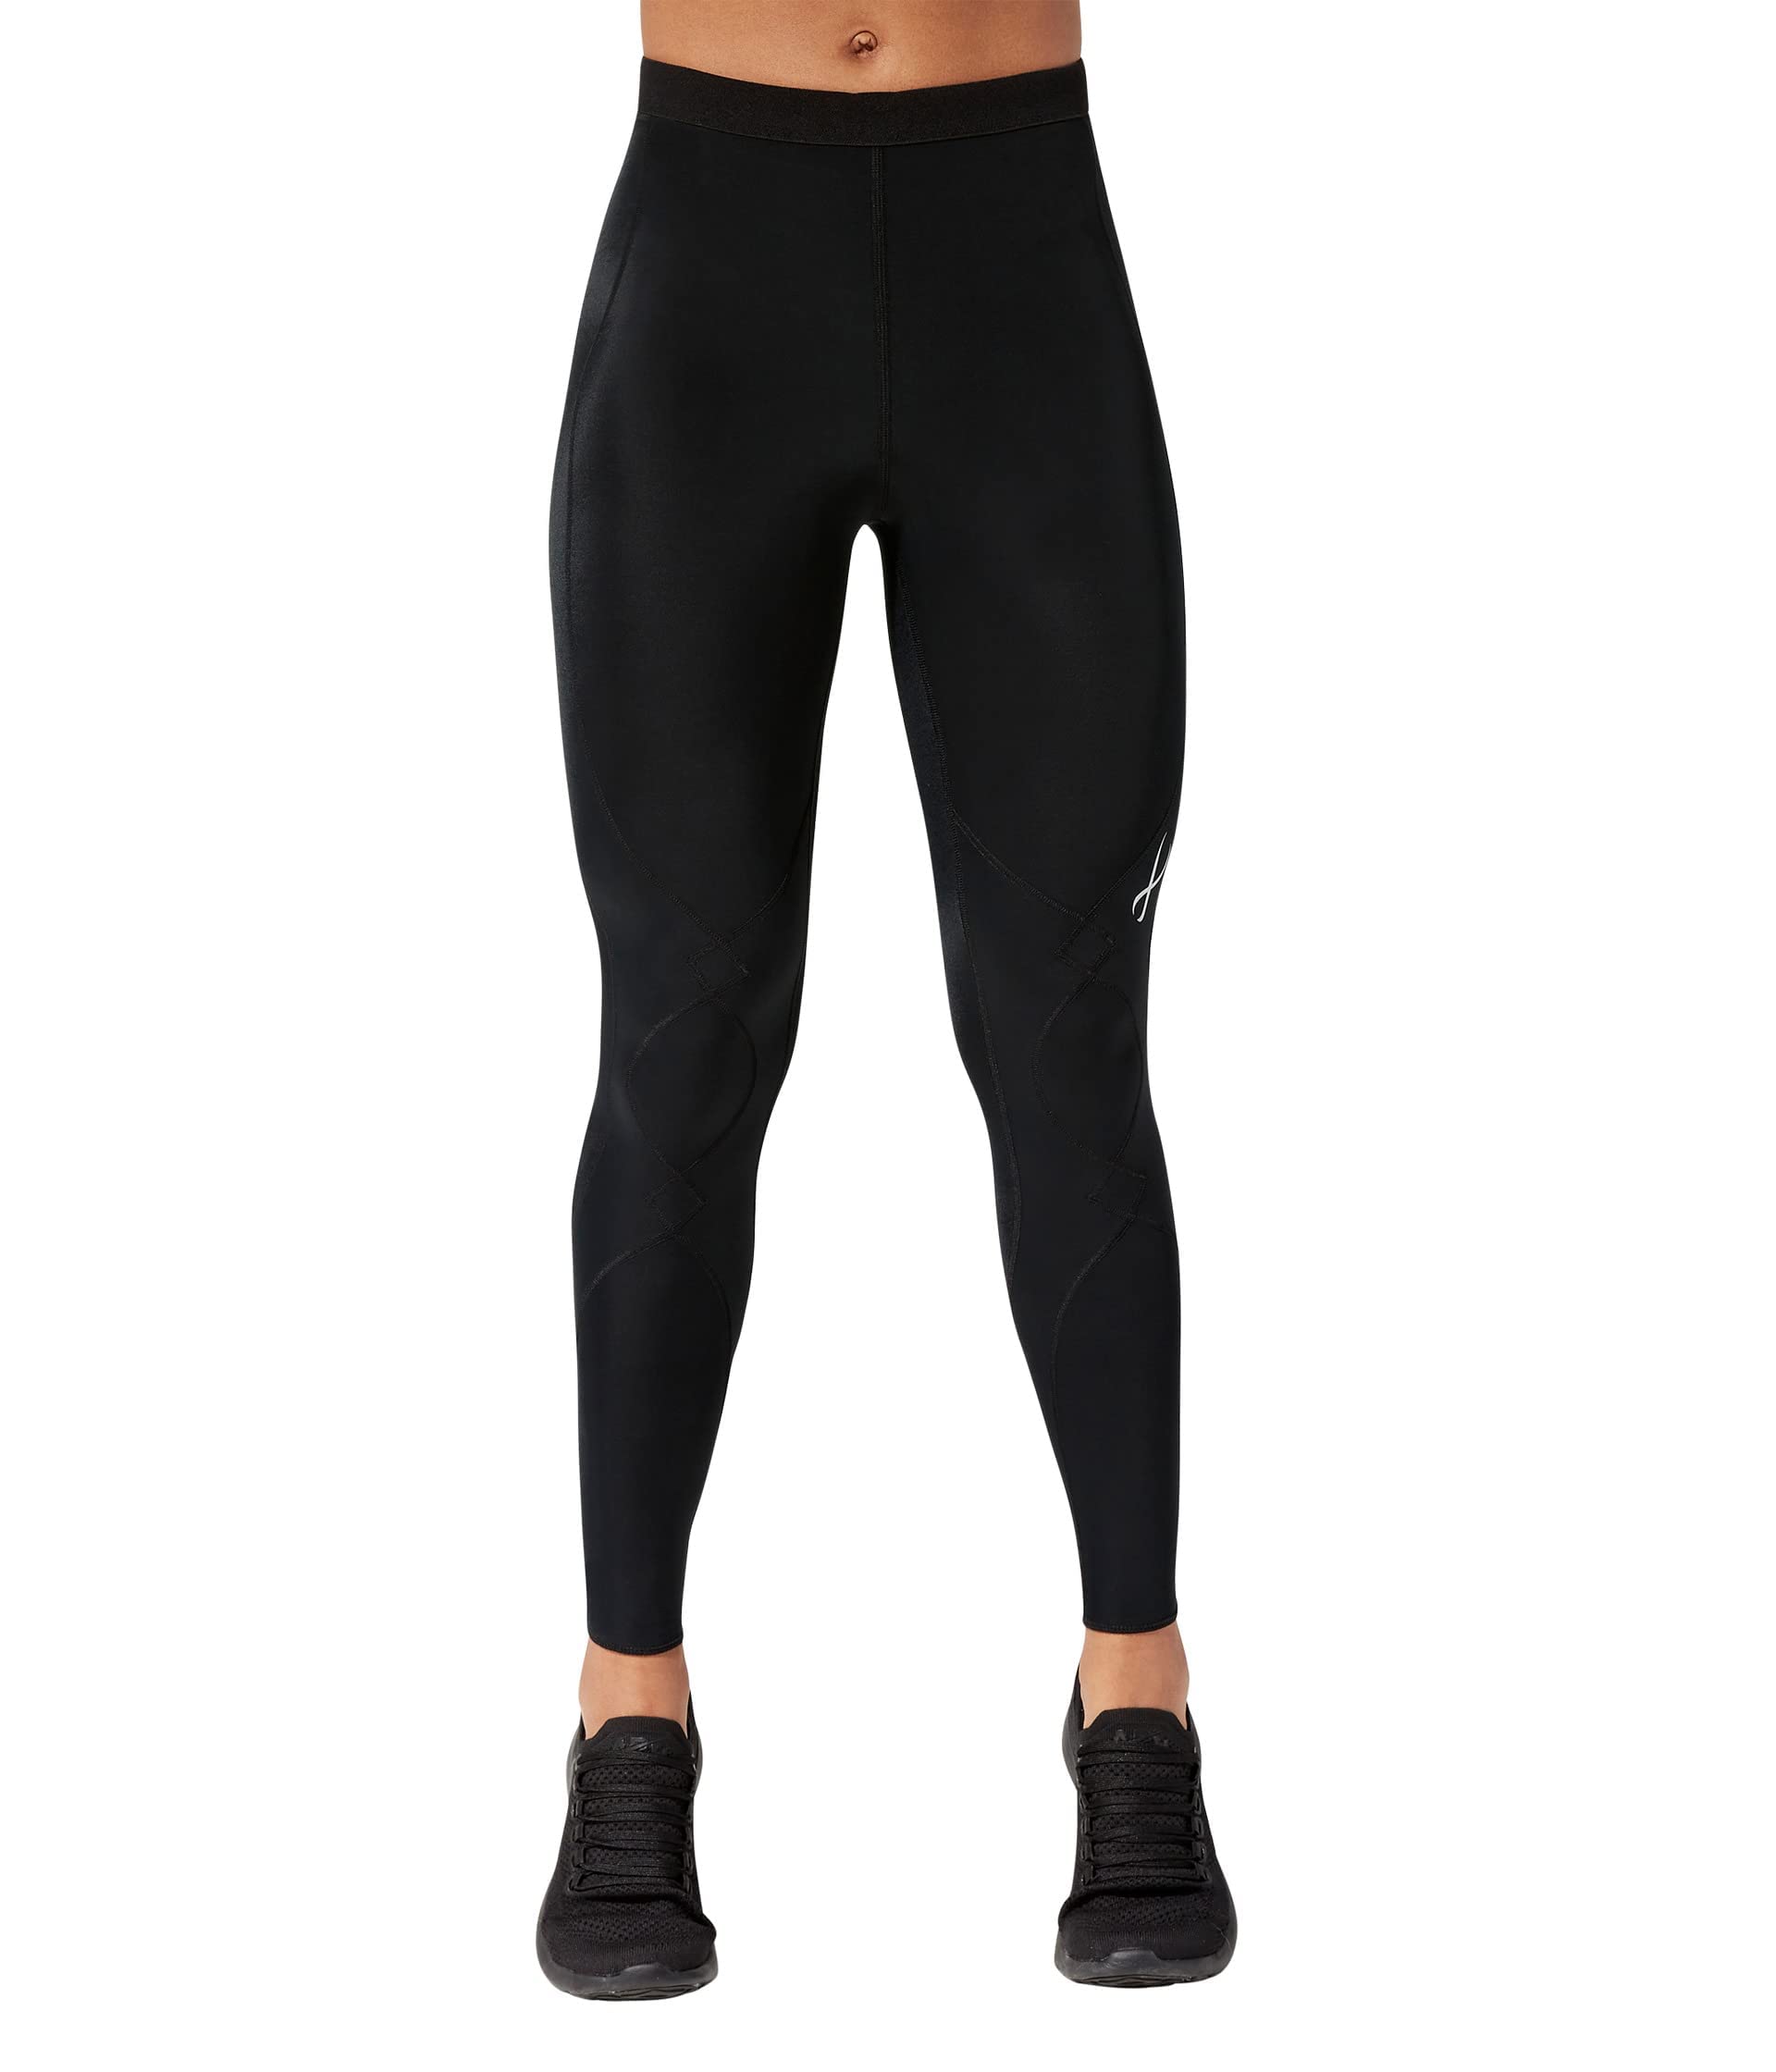 CW-X Women's Expert 3.0 Joint Support Compression Tight